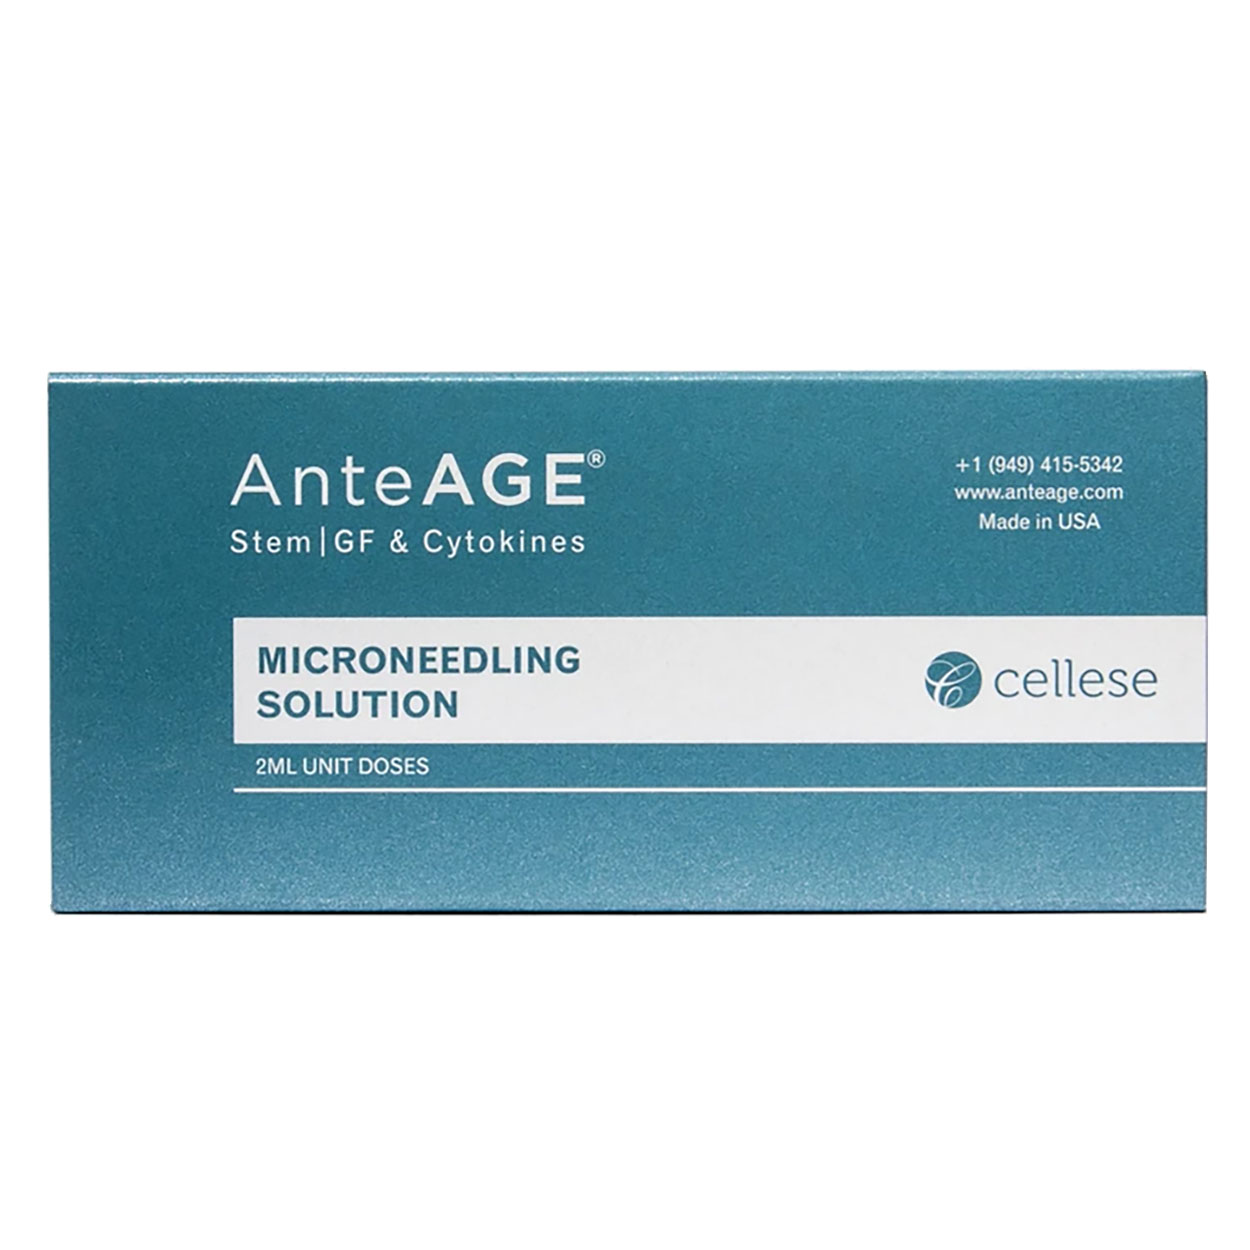 Is this beneficial if used on the scalp with a dermapen